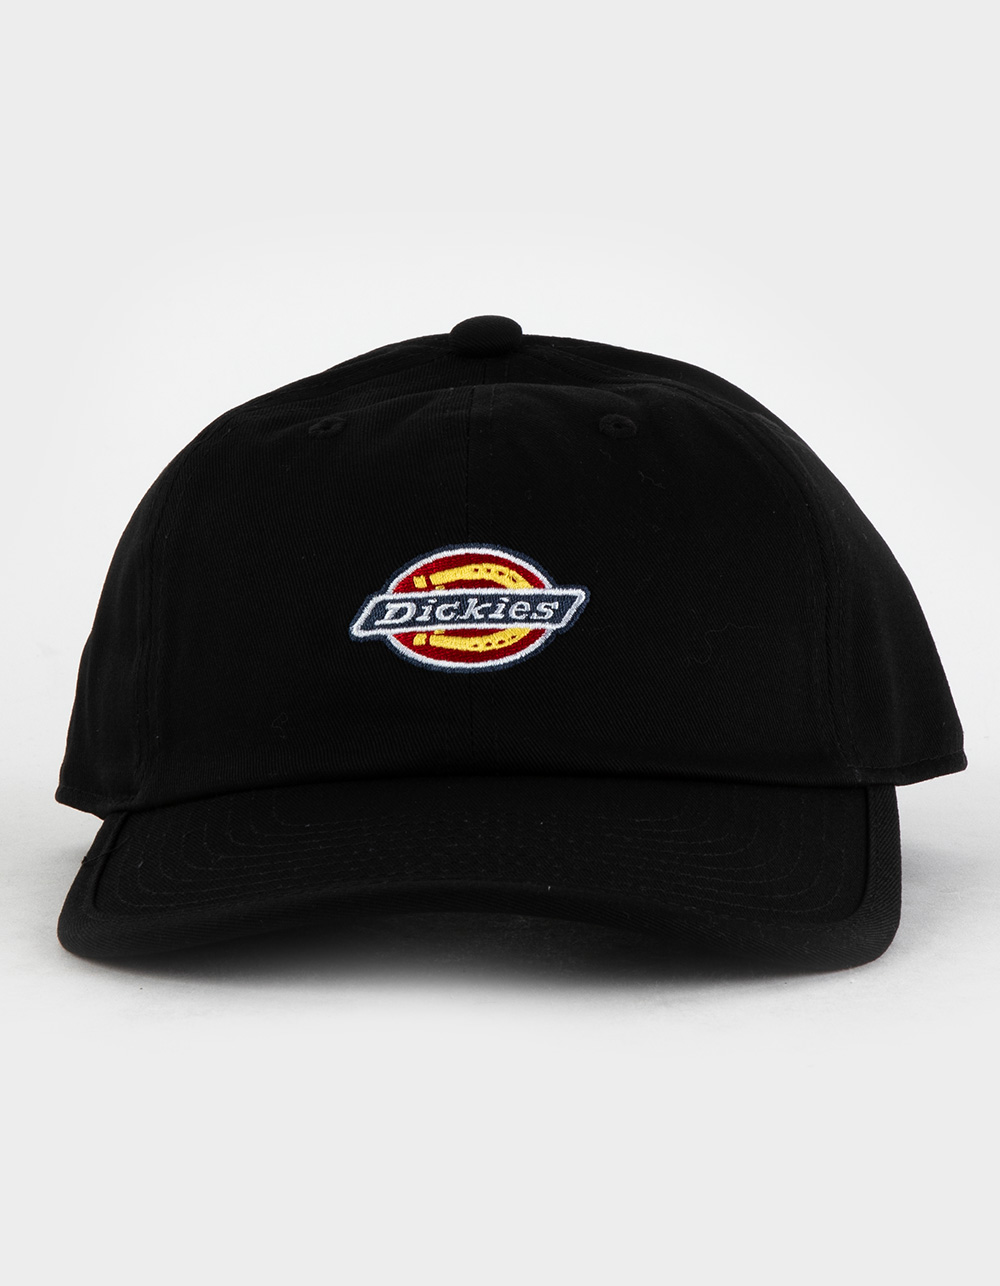 Dickies Embroidered Twill Strapback Dad Hat - Black - One Size